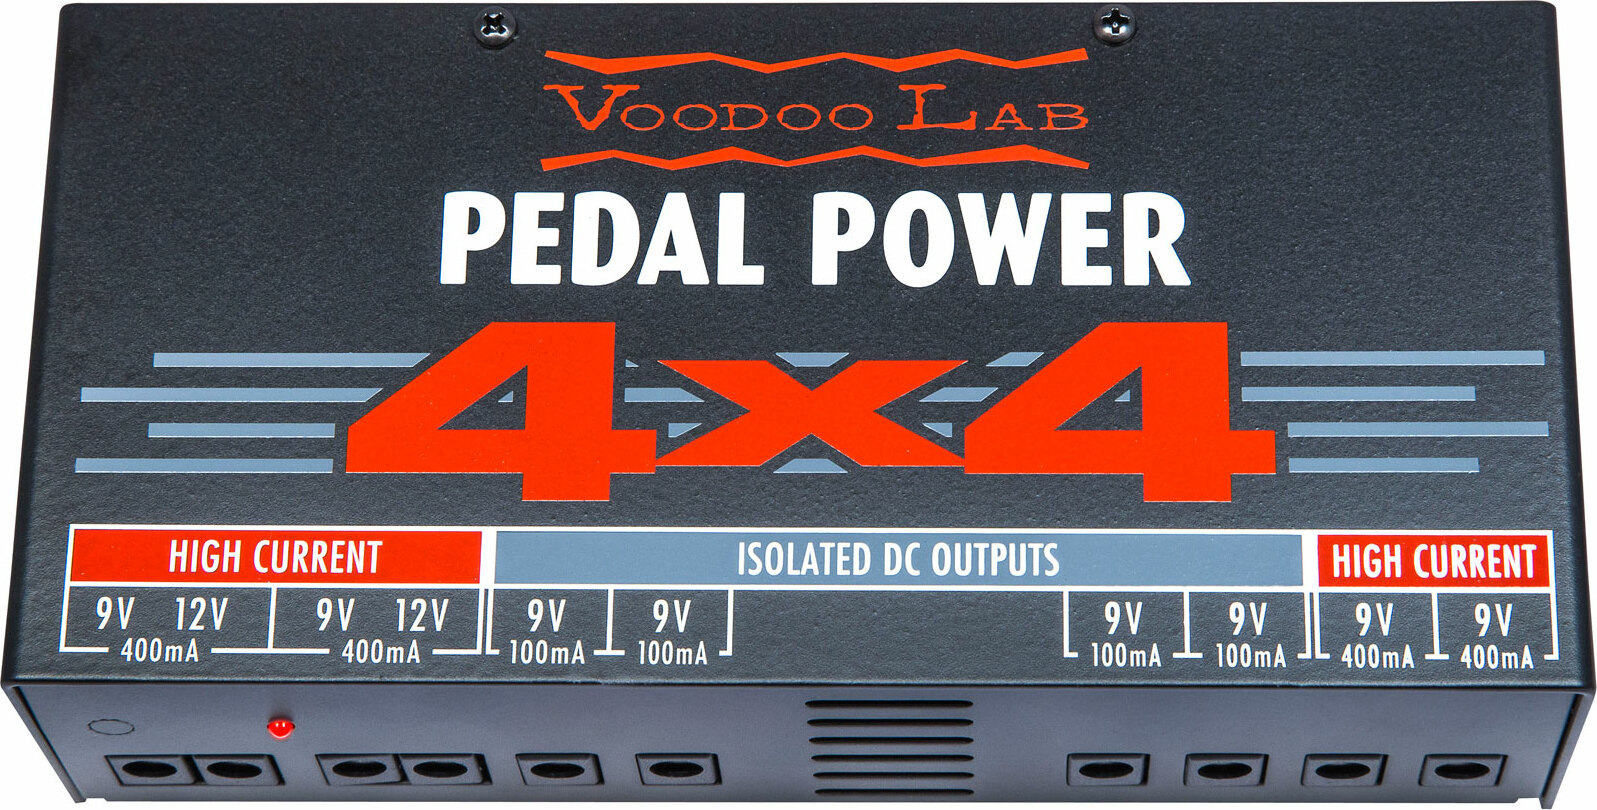 Voodoo Lab Pedal Power 4x4 - Alimentación - Main picture